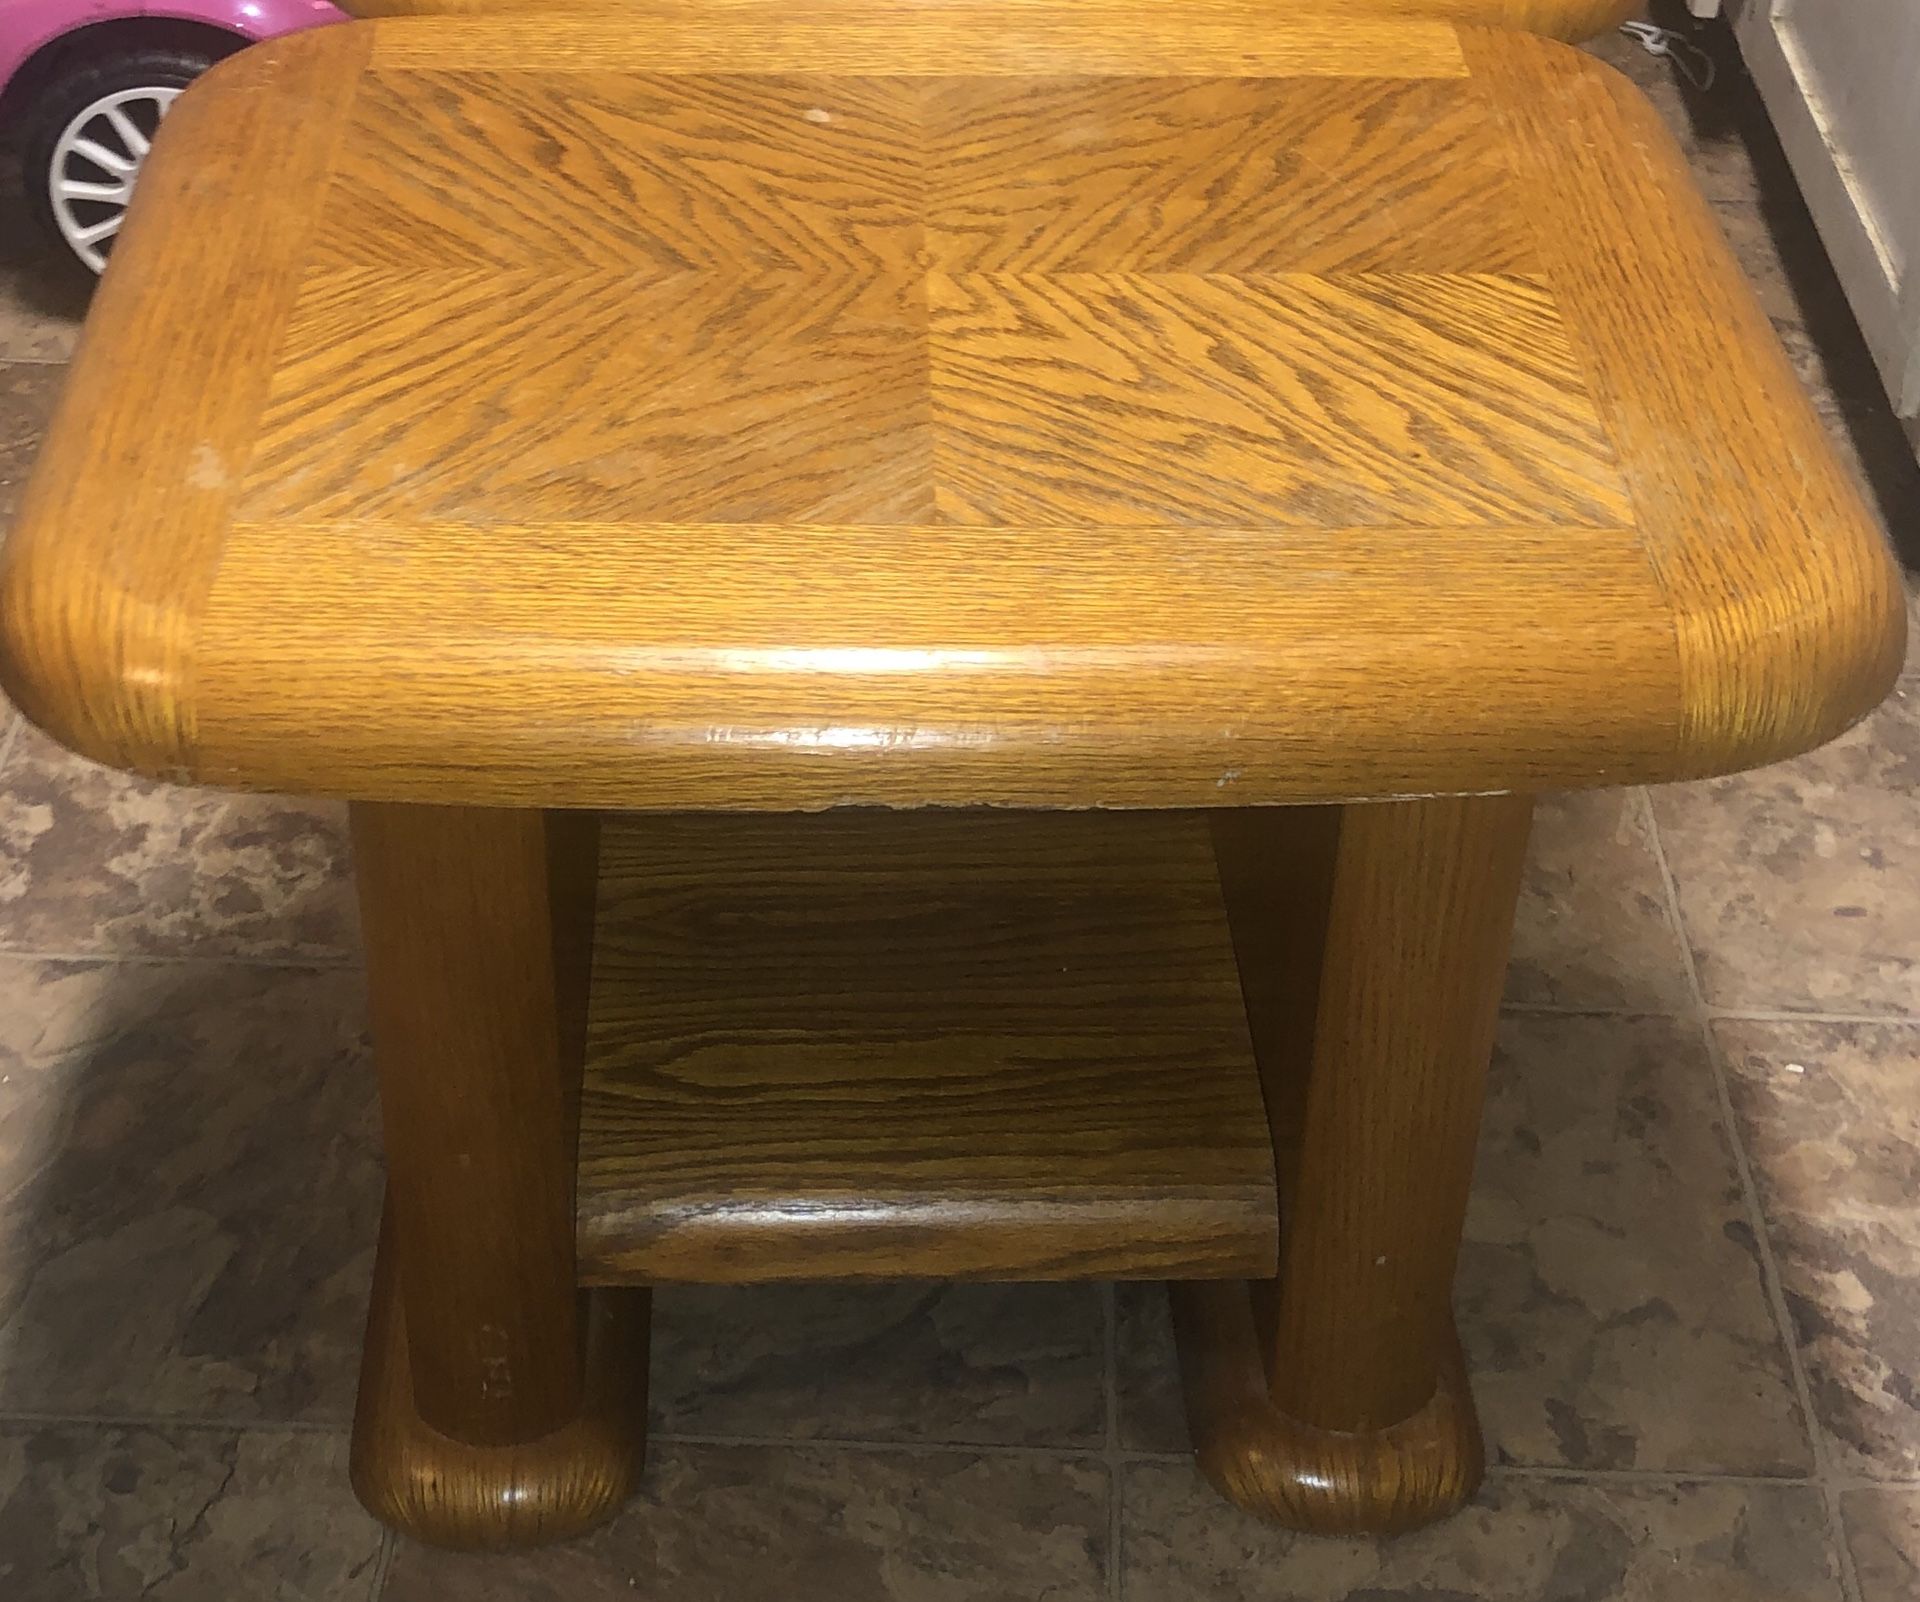 A lovely oak set of end tables with a down below small shelf.